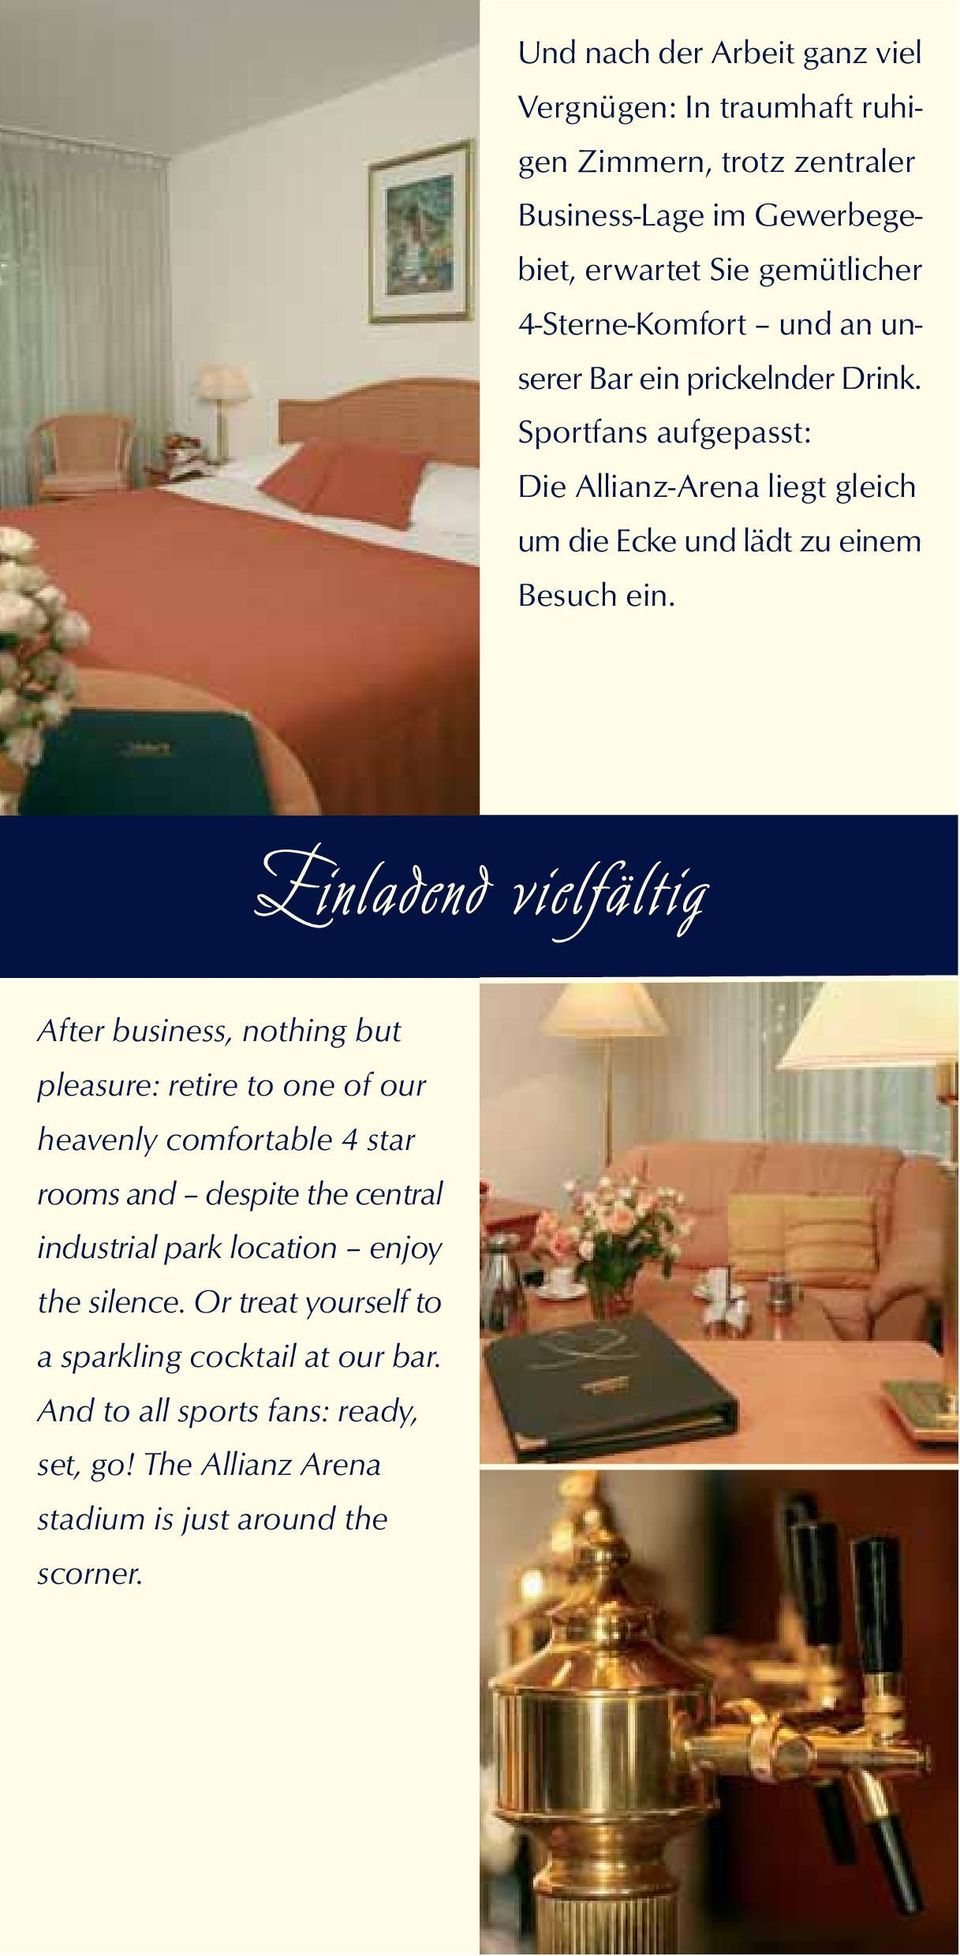 Einladend vielfältig After business, nothing but pleasure: retire to one of our heavenly comfortable 4 star rooms and despite the central industrial park